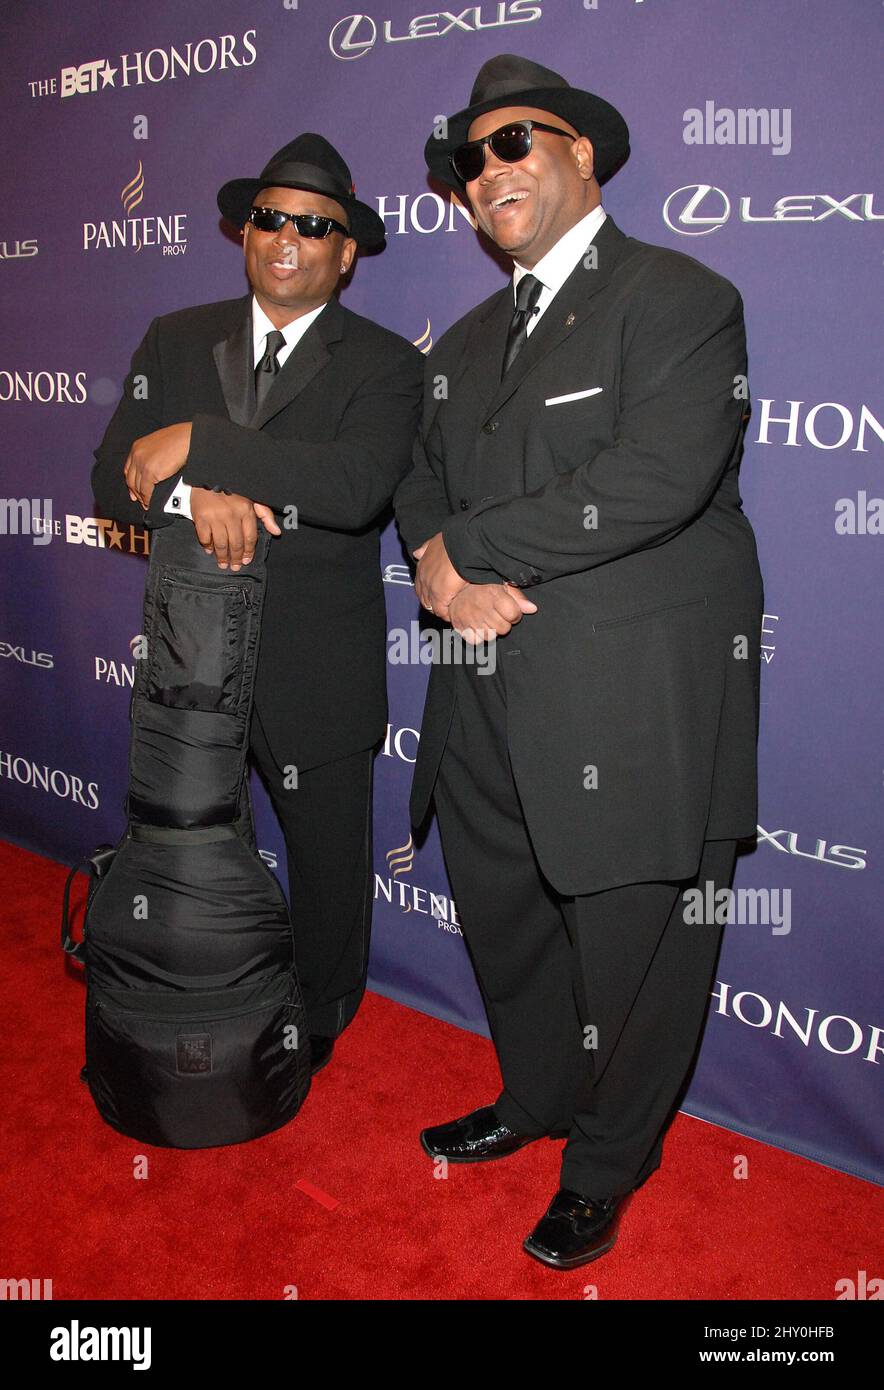 Jimmy Jam & Terry Lewis attending the 2013 BET Honours Awards in Washington Stock Photo